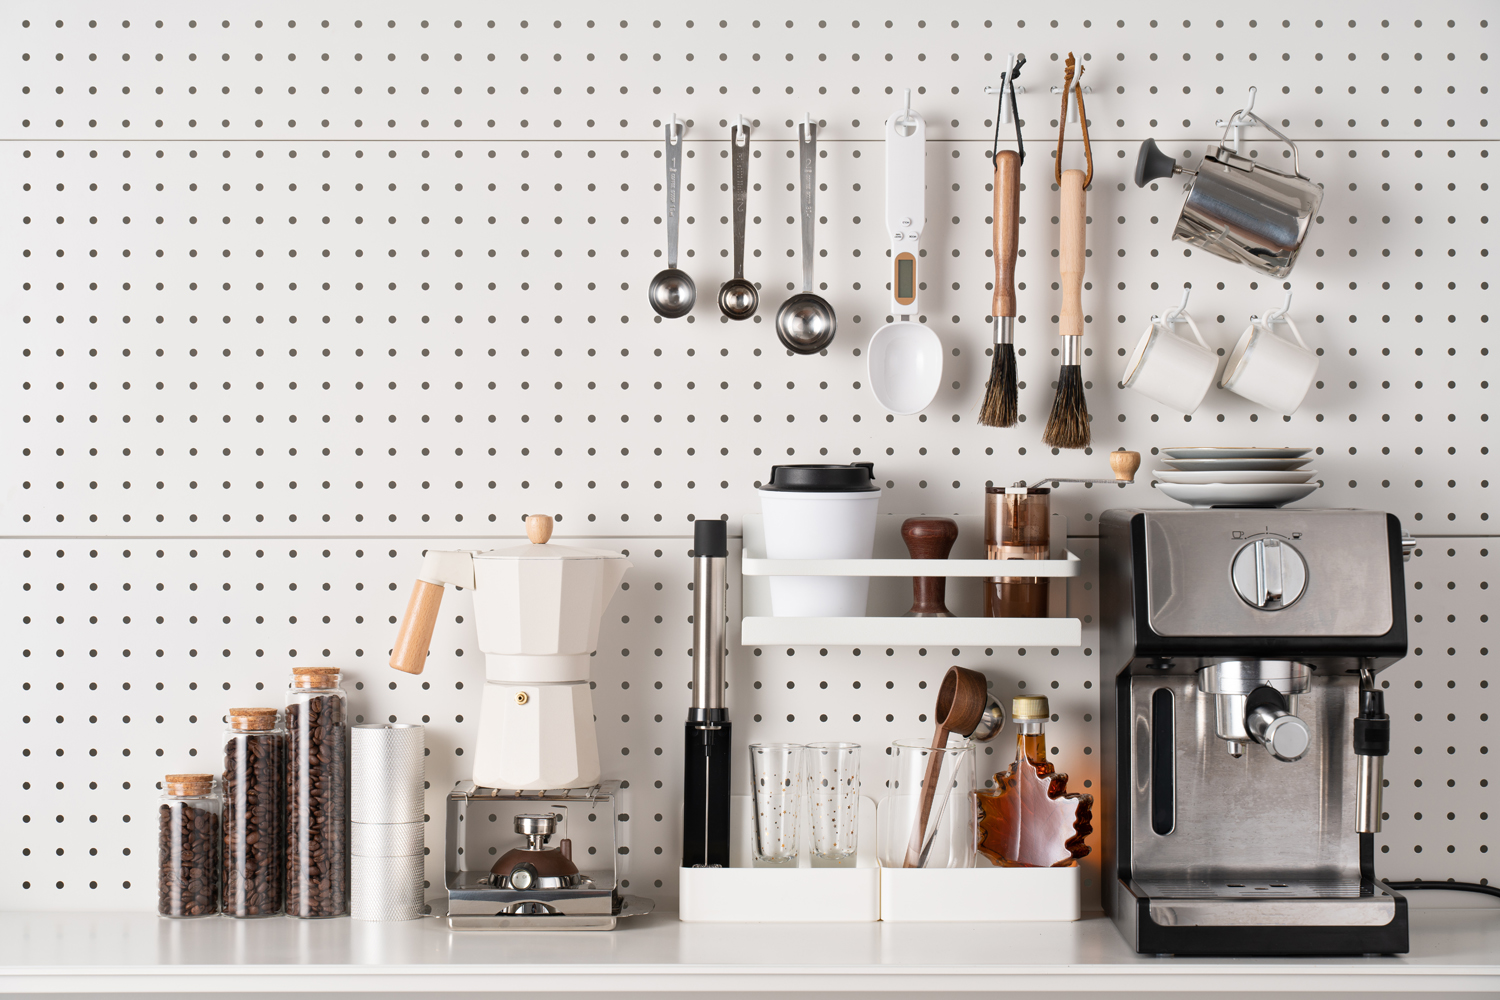 30 Kitchen Gift Ideas for $25 or Less - This Pilgrim Life